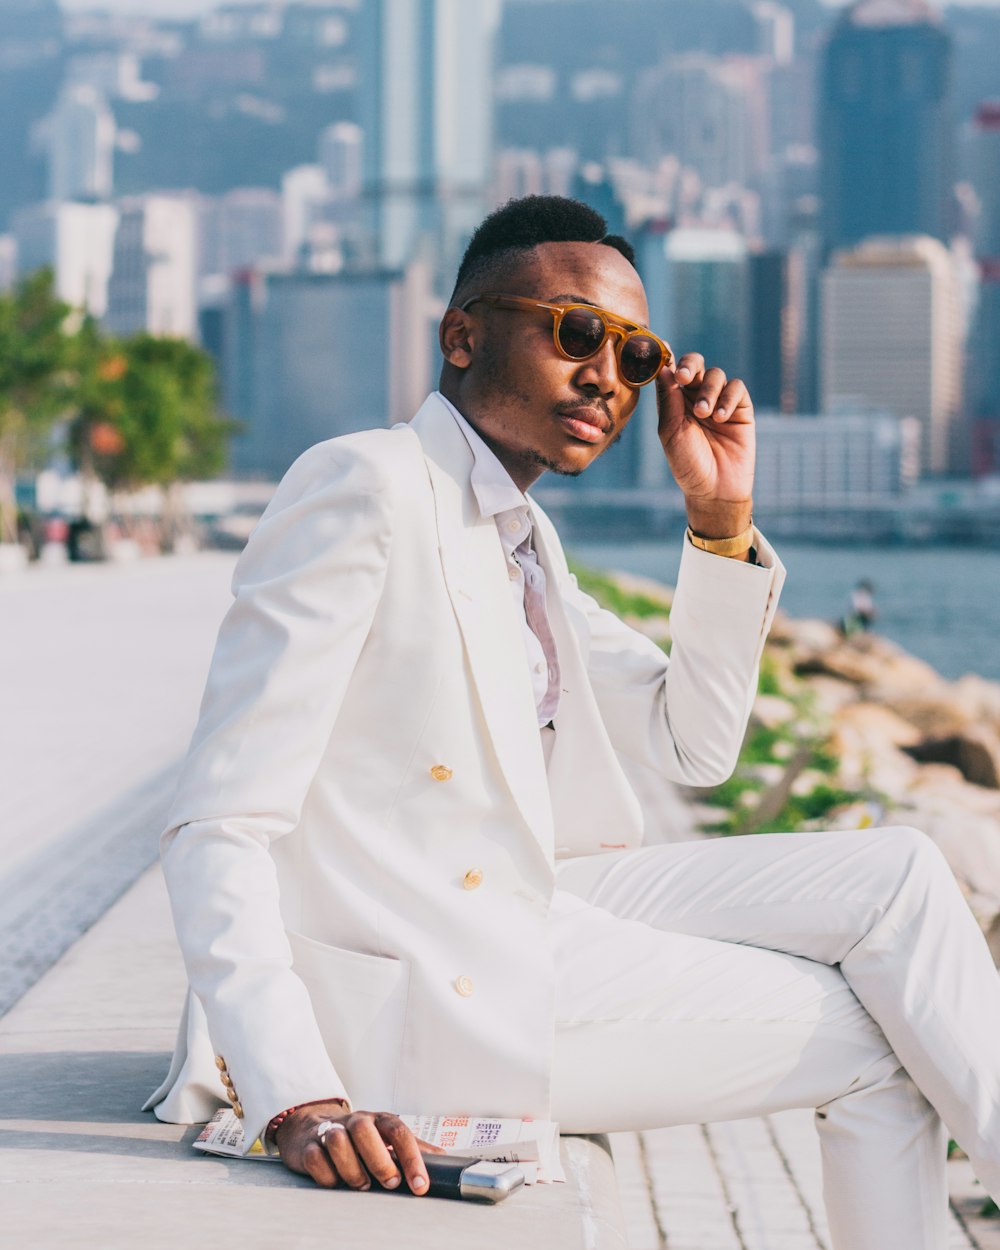 White Suit Pictures | Download Free Images on Unsplash